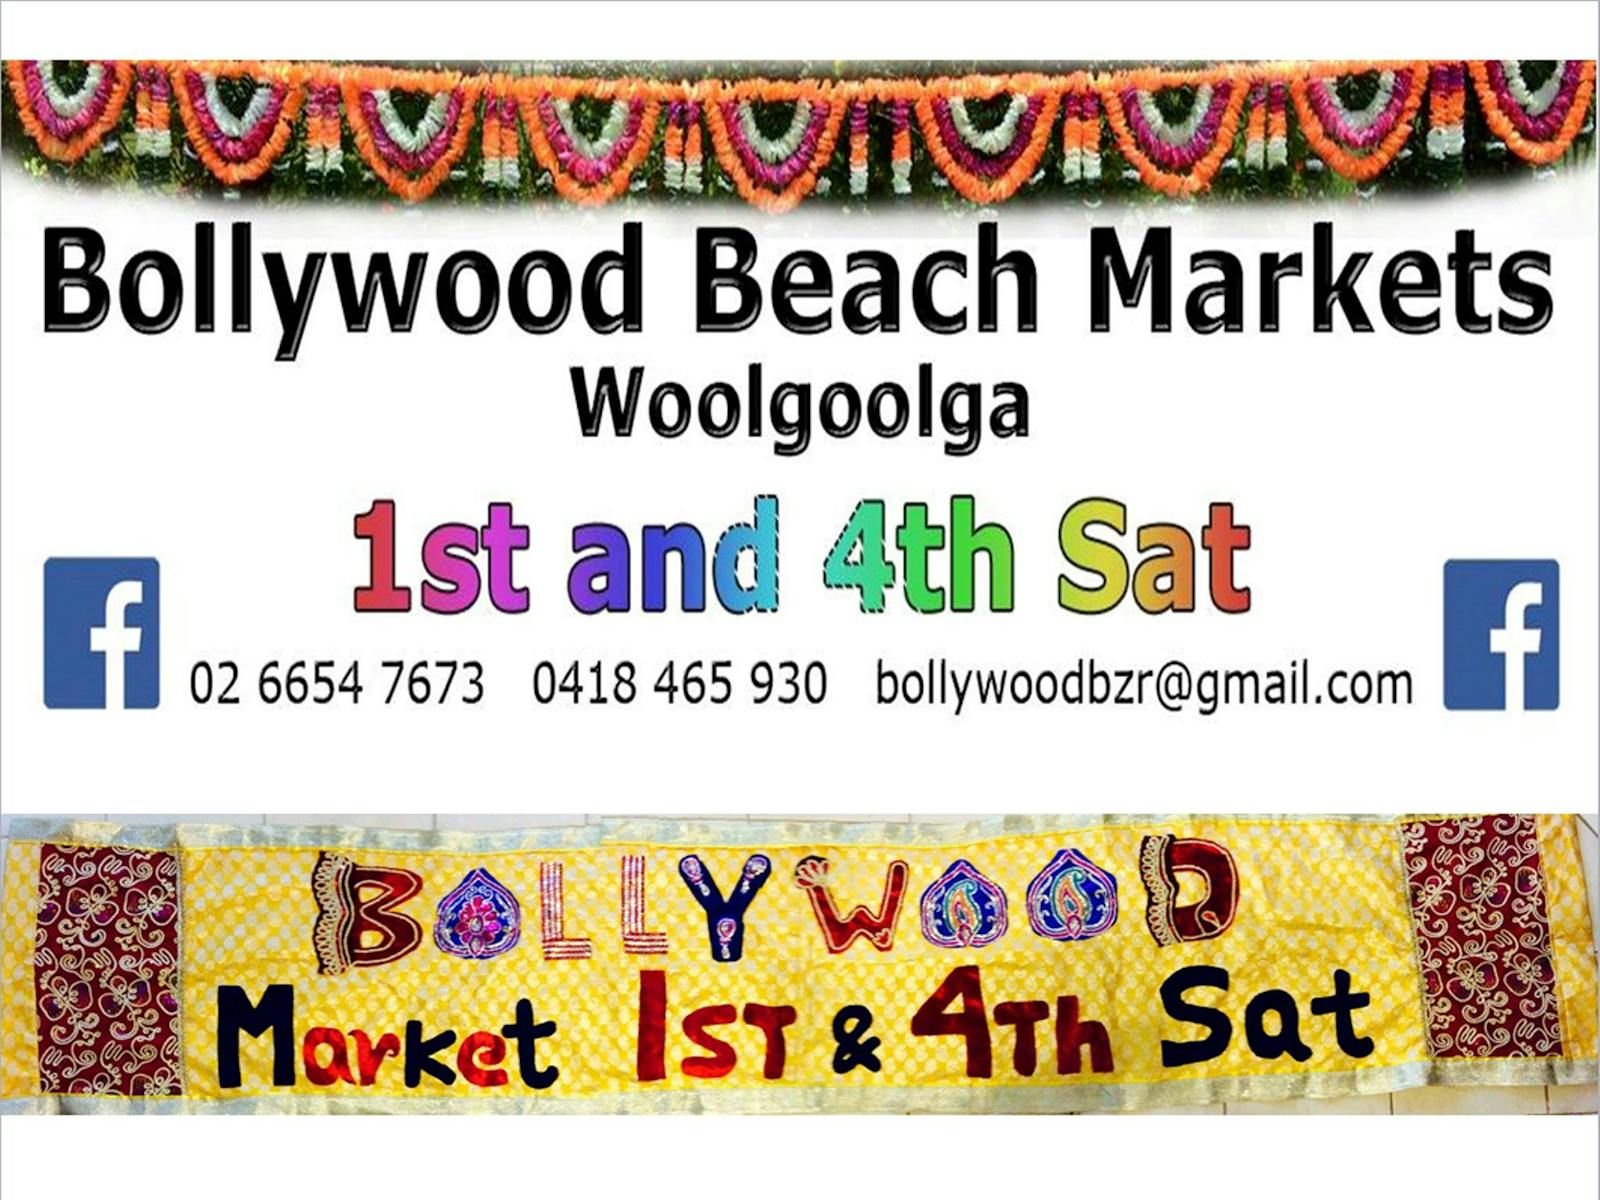 Image for Bollywood Beach Markets